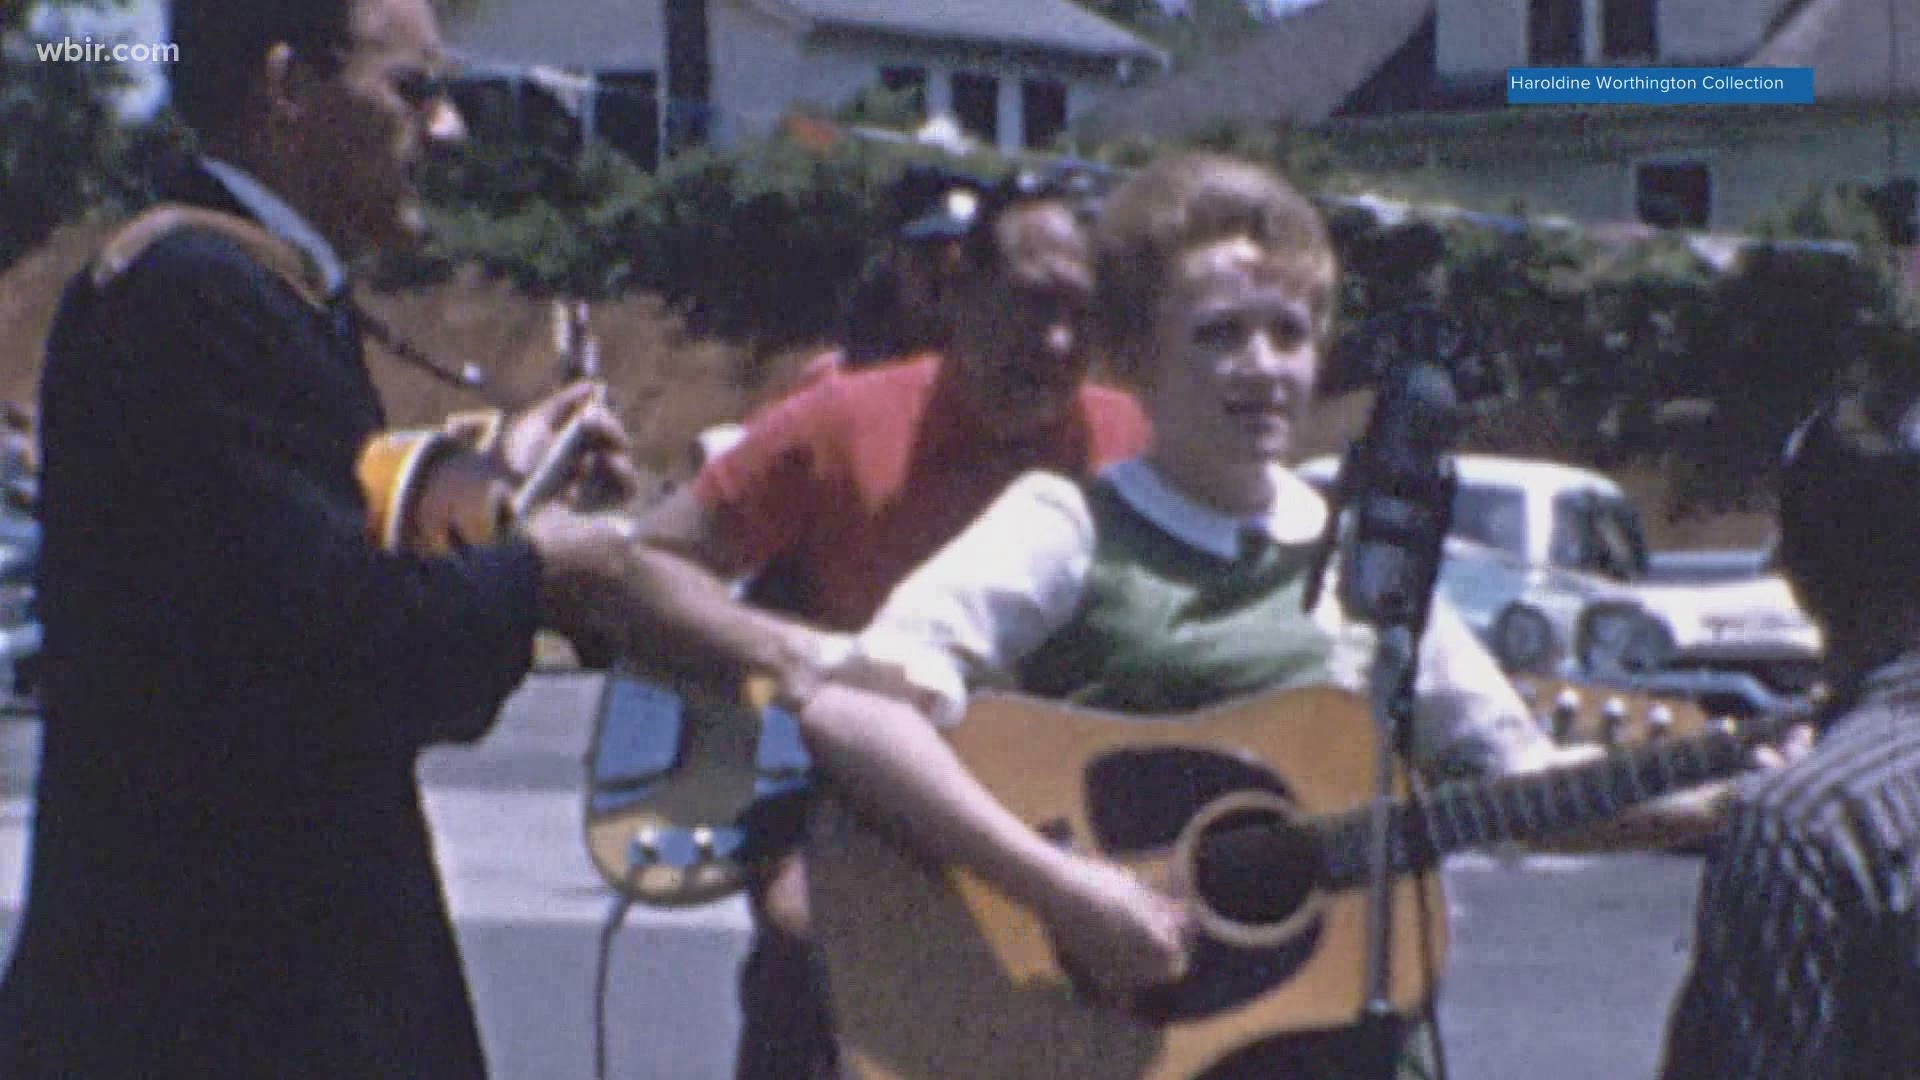 Archivist Bradley Reeves home movies featuring 14 year old Dolly Parton performing at a Cas Walker event. From the Worthington collection. Feb. 4, 2021-4pm